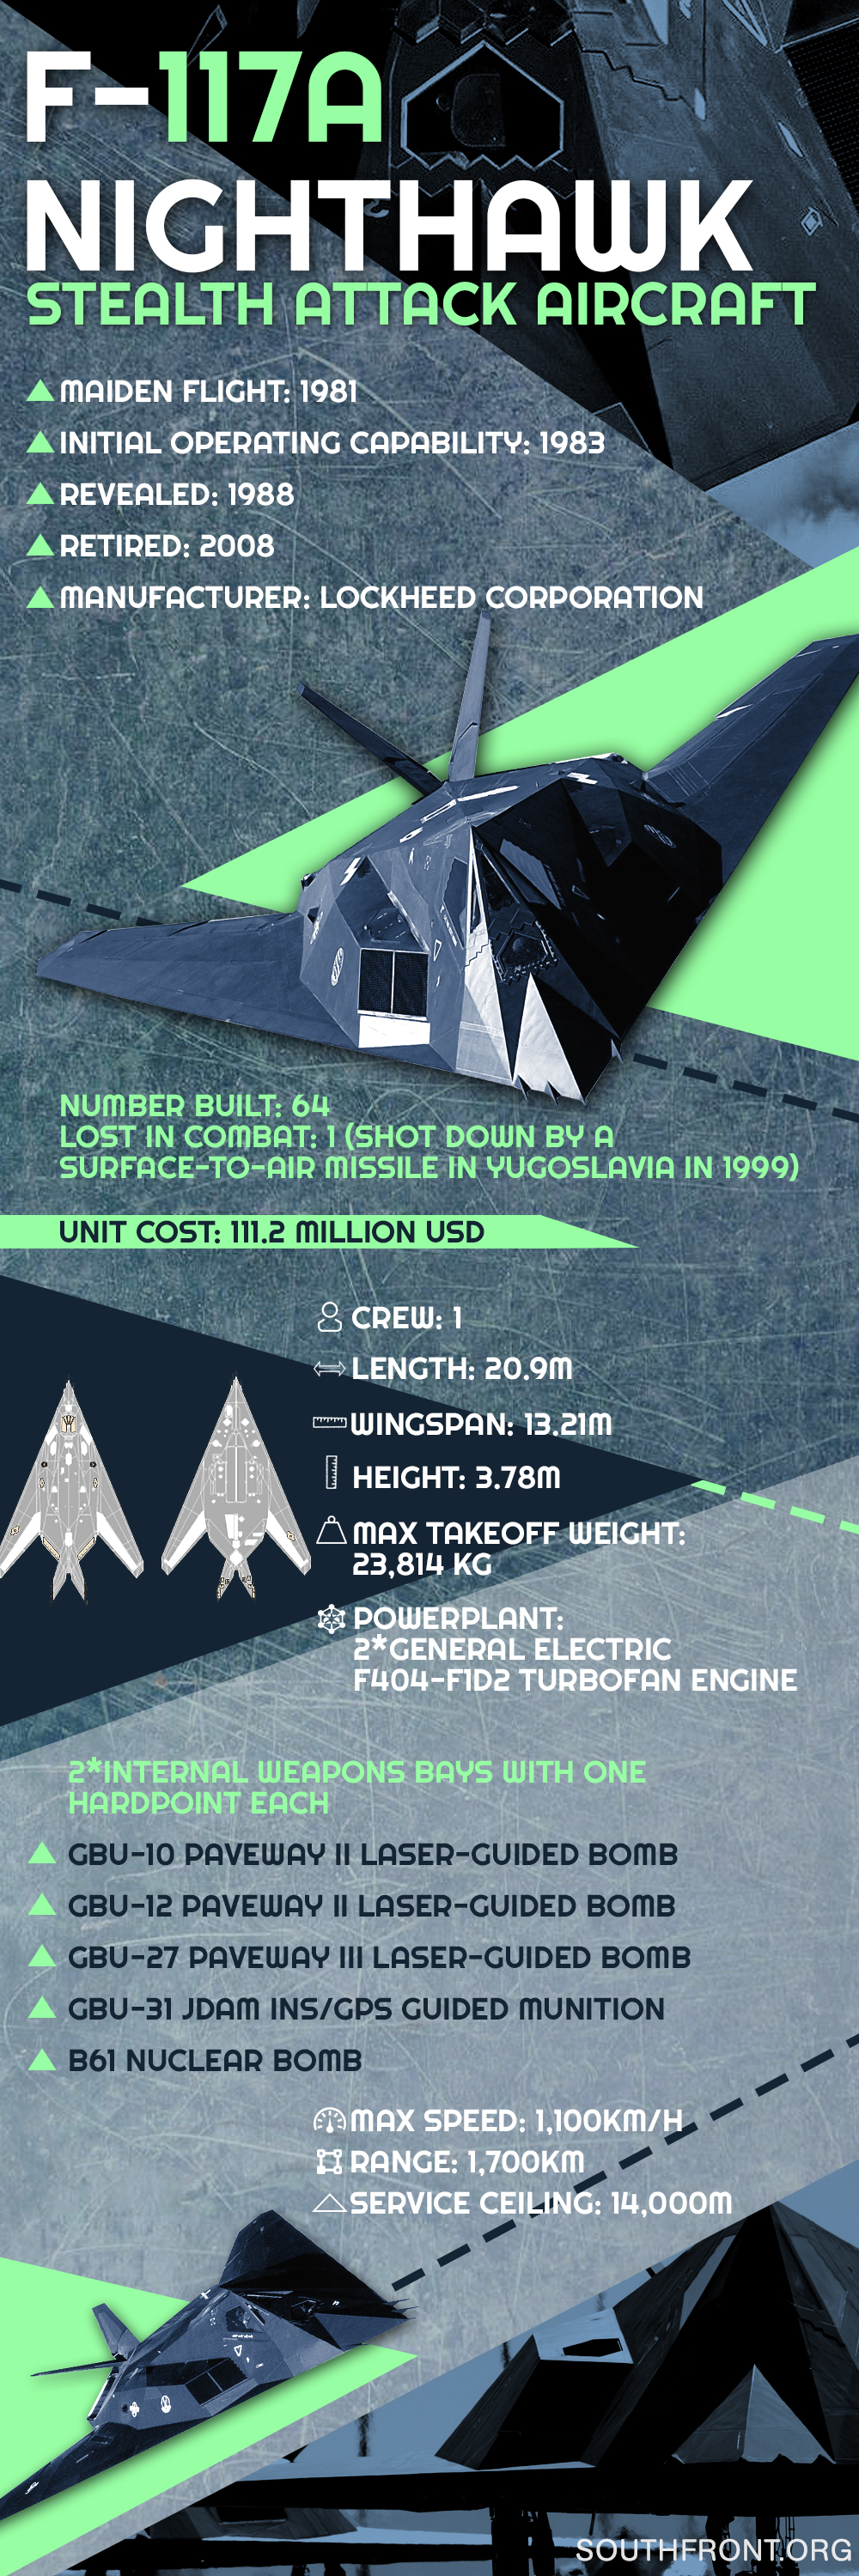 F-117A Nighthawk Stealth Attack Aircraft (Infographics)